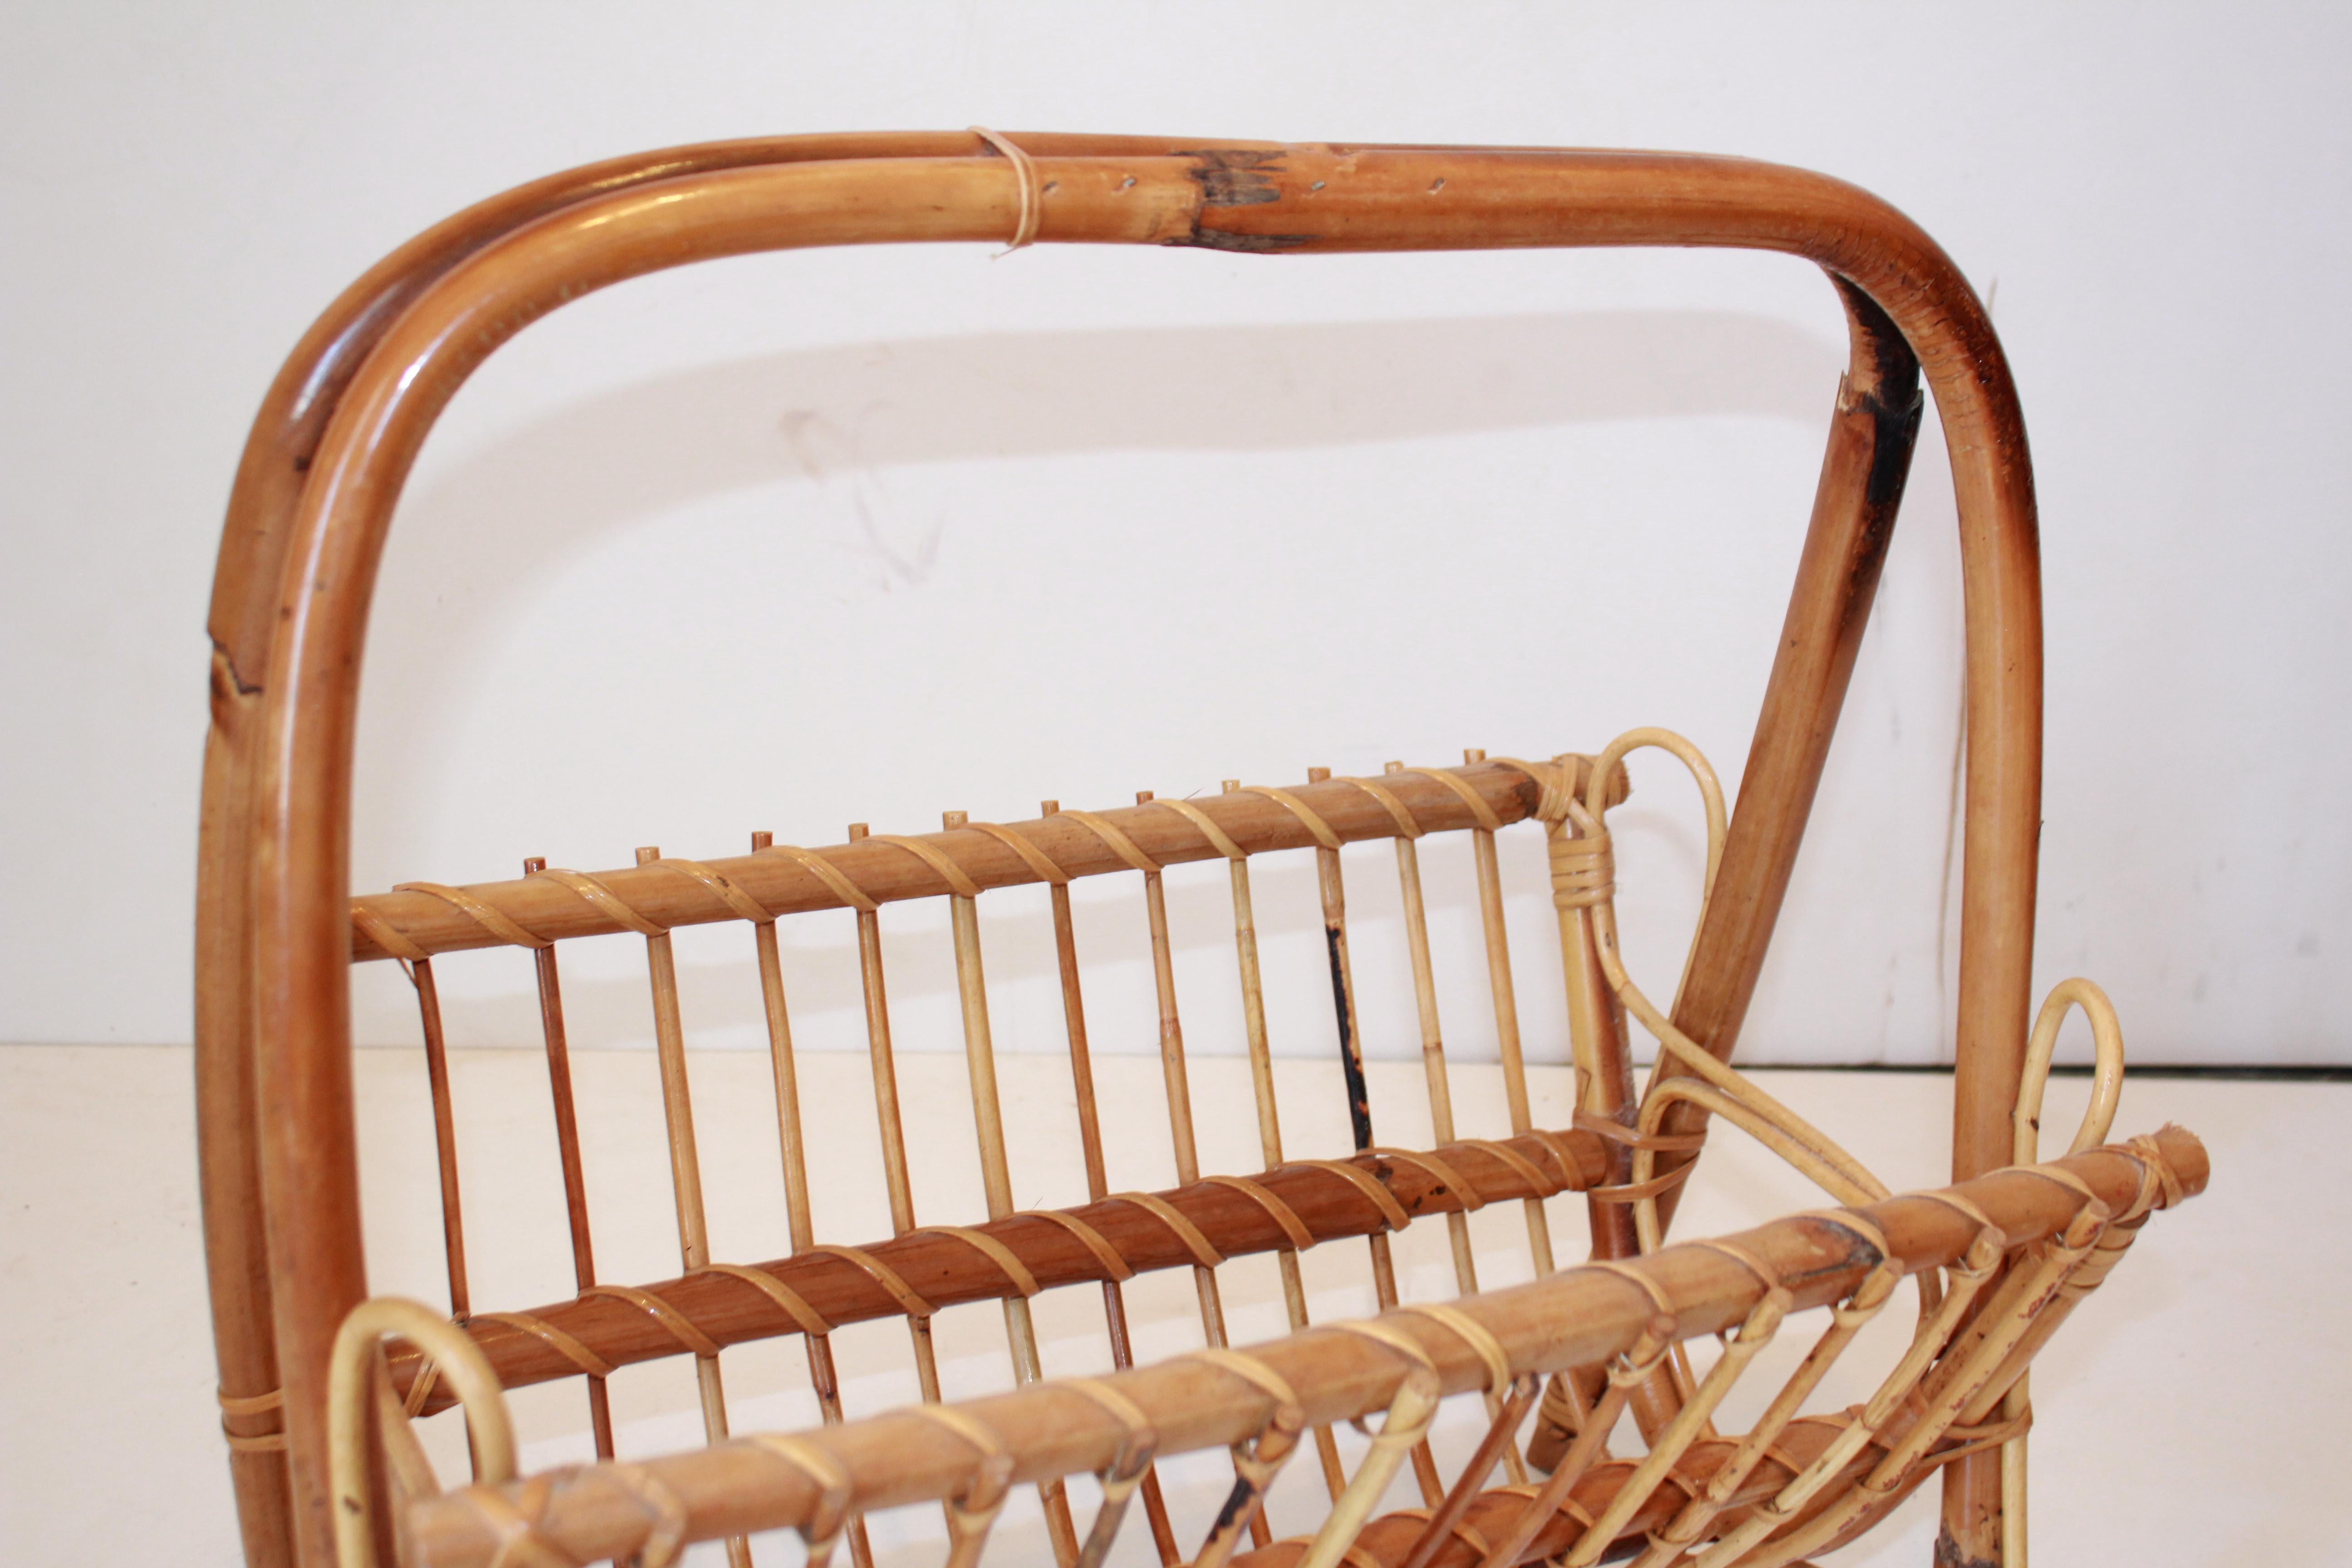 Bamboo Magazine Rack in Franco Albini Style, Italy 1960s For Sale 2